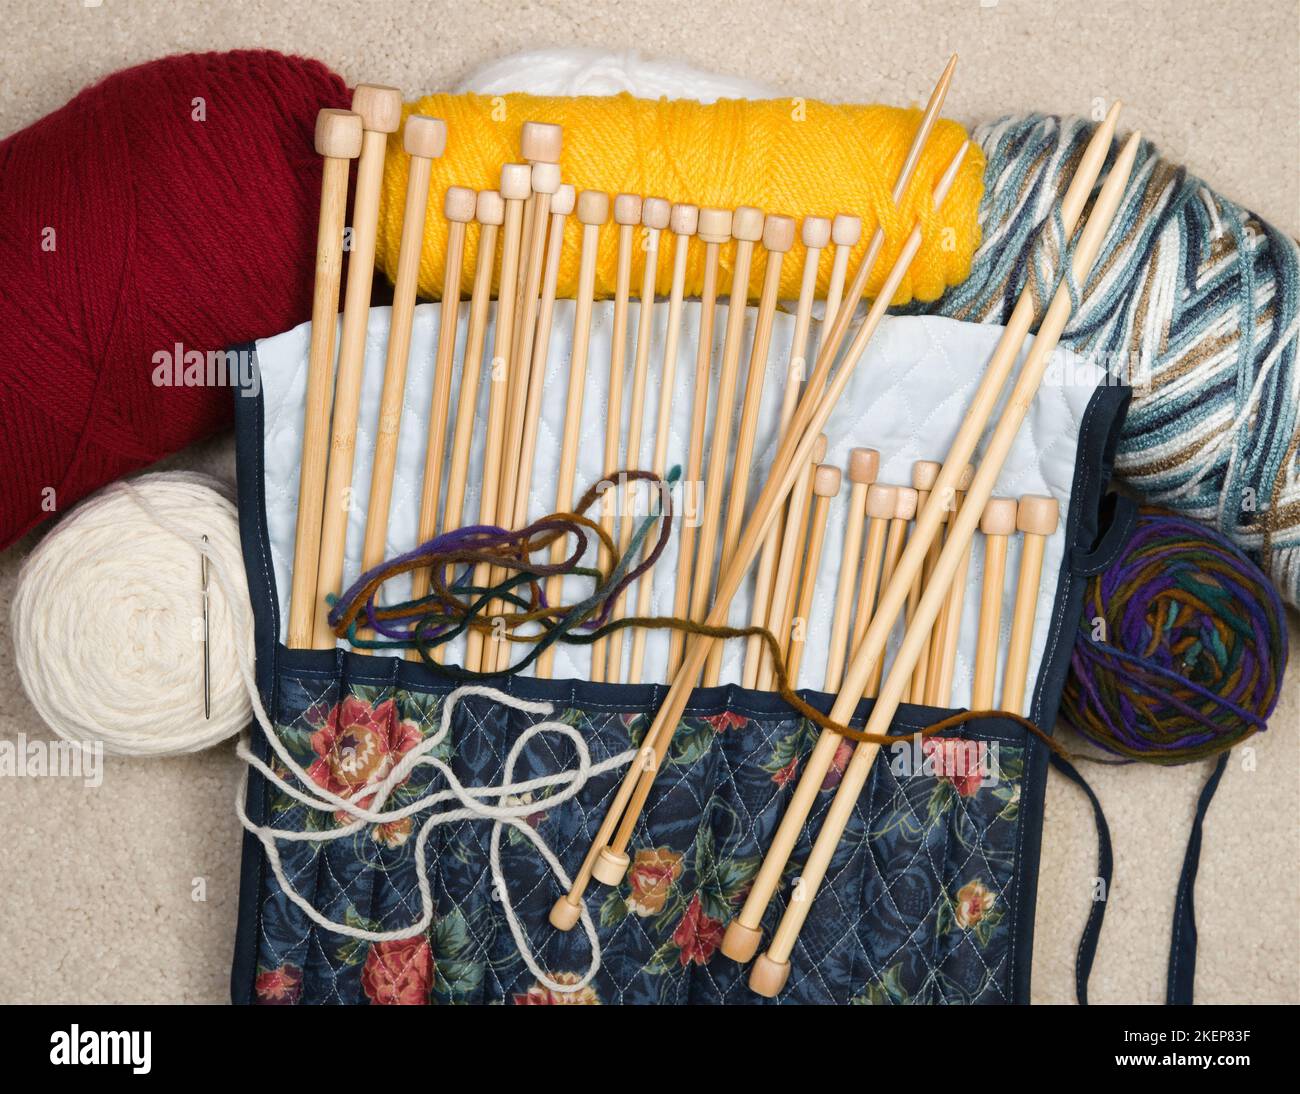 Knitting tools and kit for crafting Stock Photo